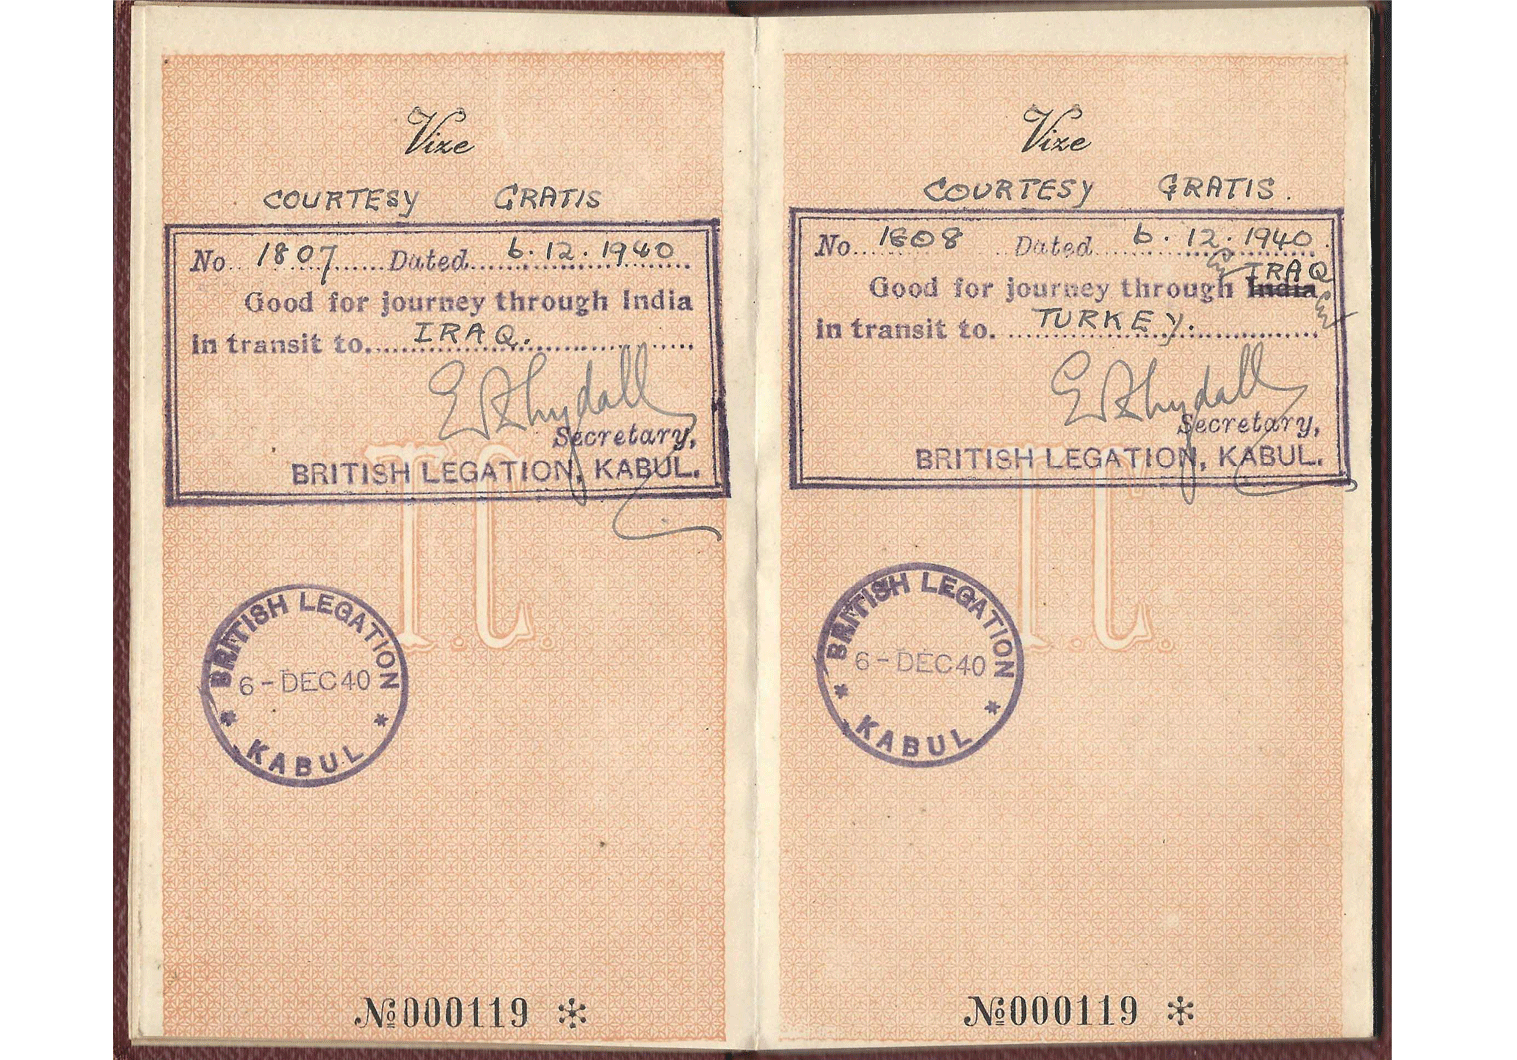 WW2 special passport for Afghanistan.